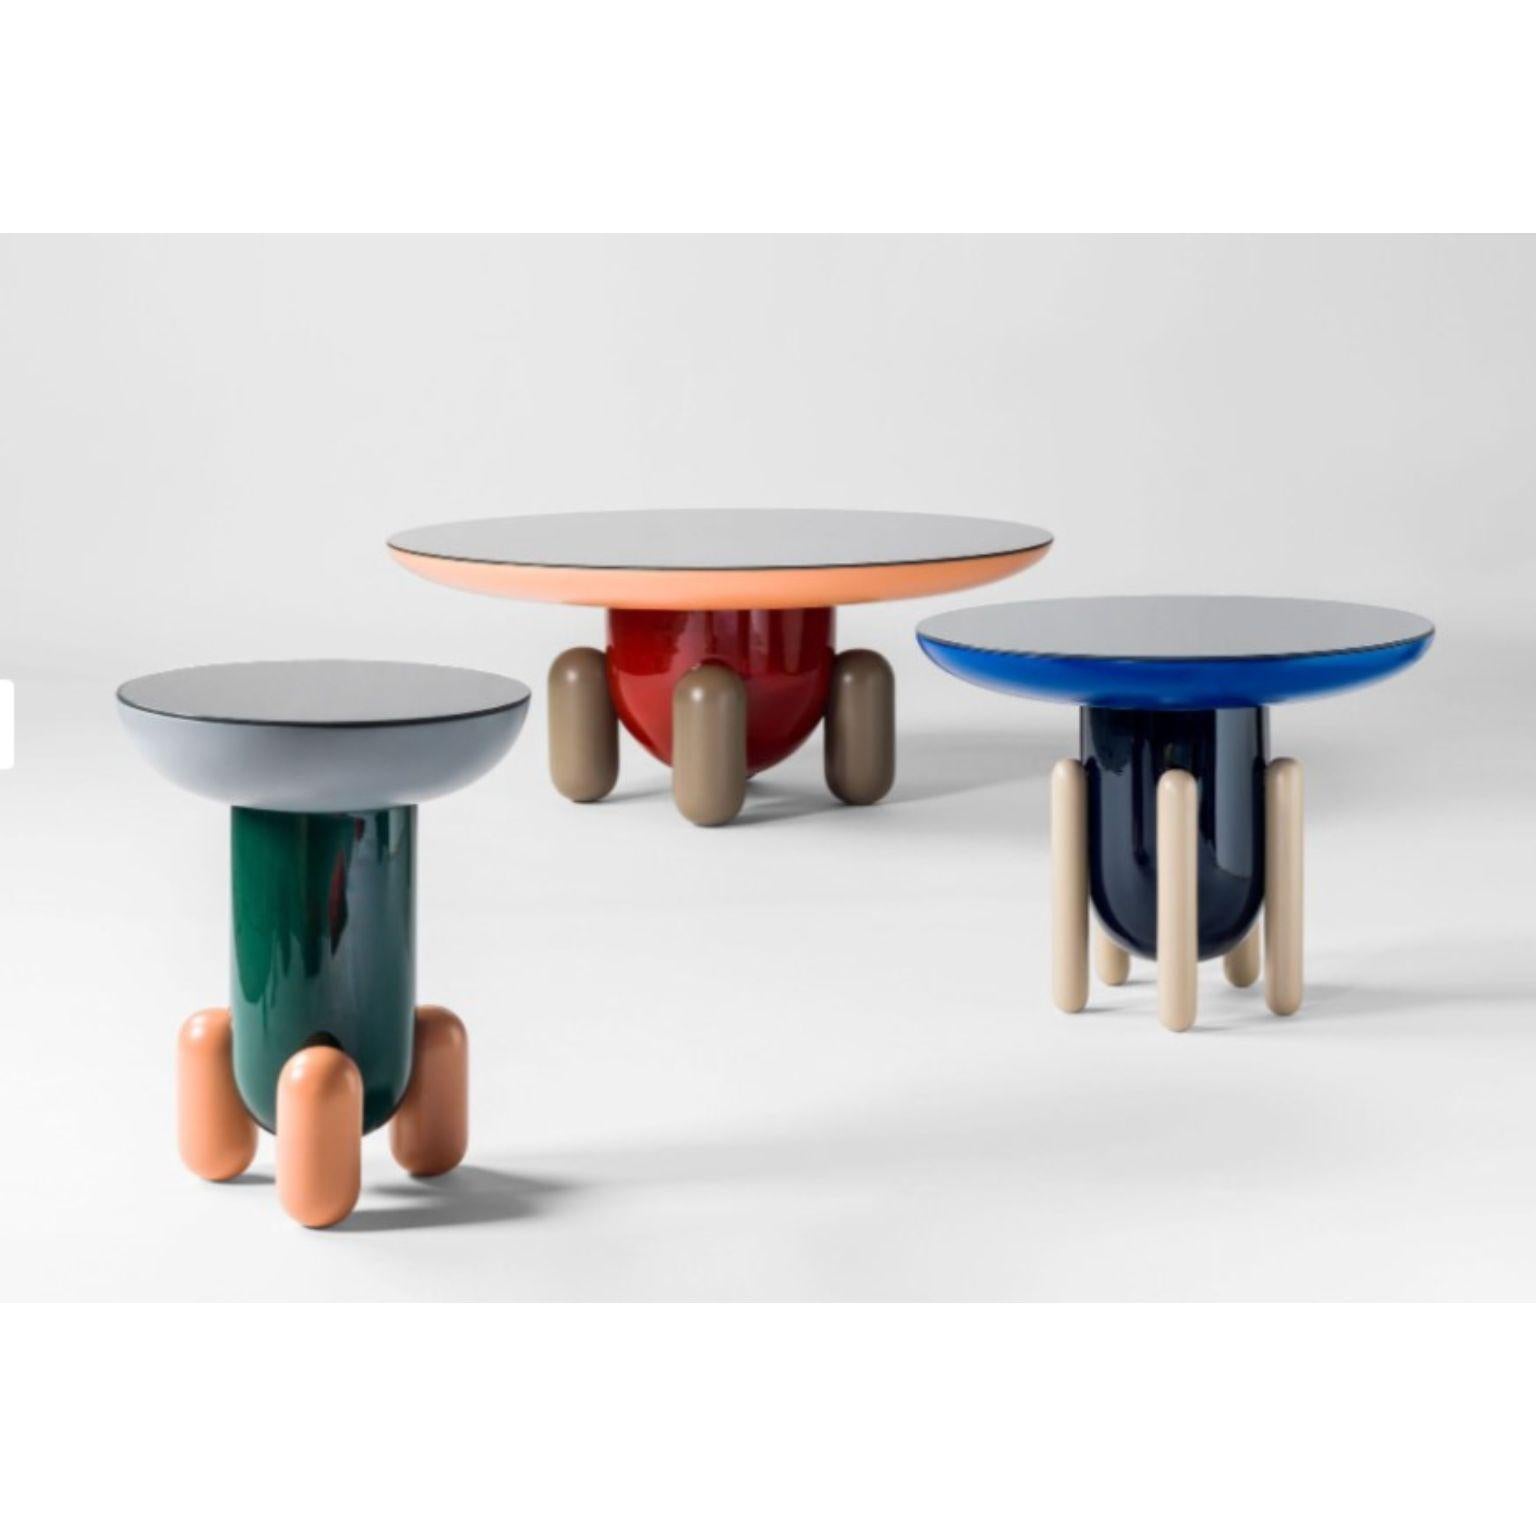 Set of Explorer side tables by Jaime Hayon
Dimensions: D40 x H50 , D60 x H46 , D100 x H42 cm
Materials: Lacquered fiberglass body. Solid turned wooden legs and lacquered. Painted glass tabletop.
Available in sizes Explorer 1 (Diameter 40 cm) and